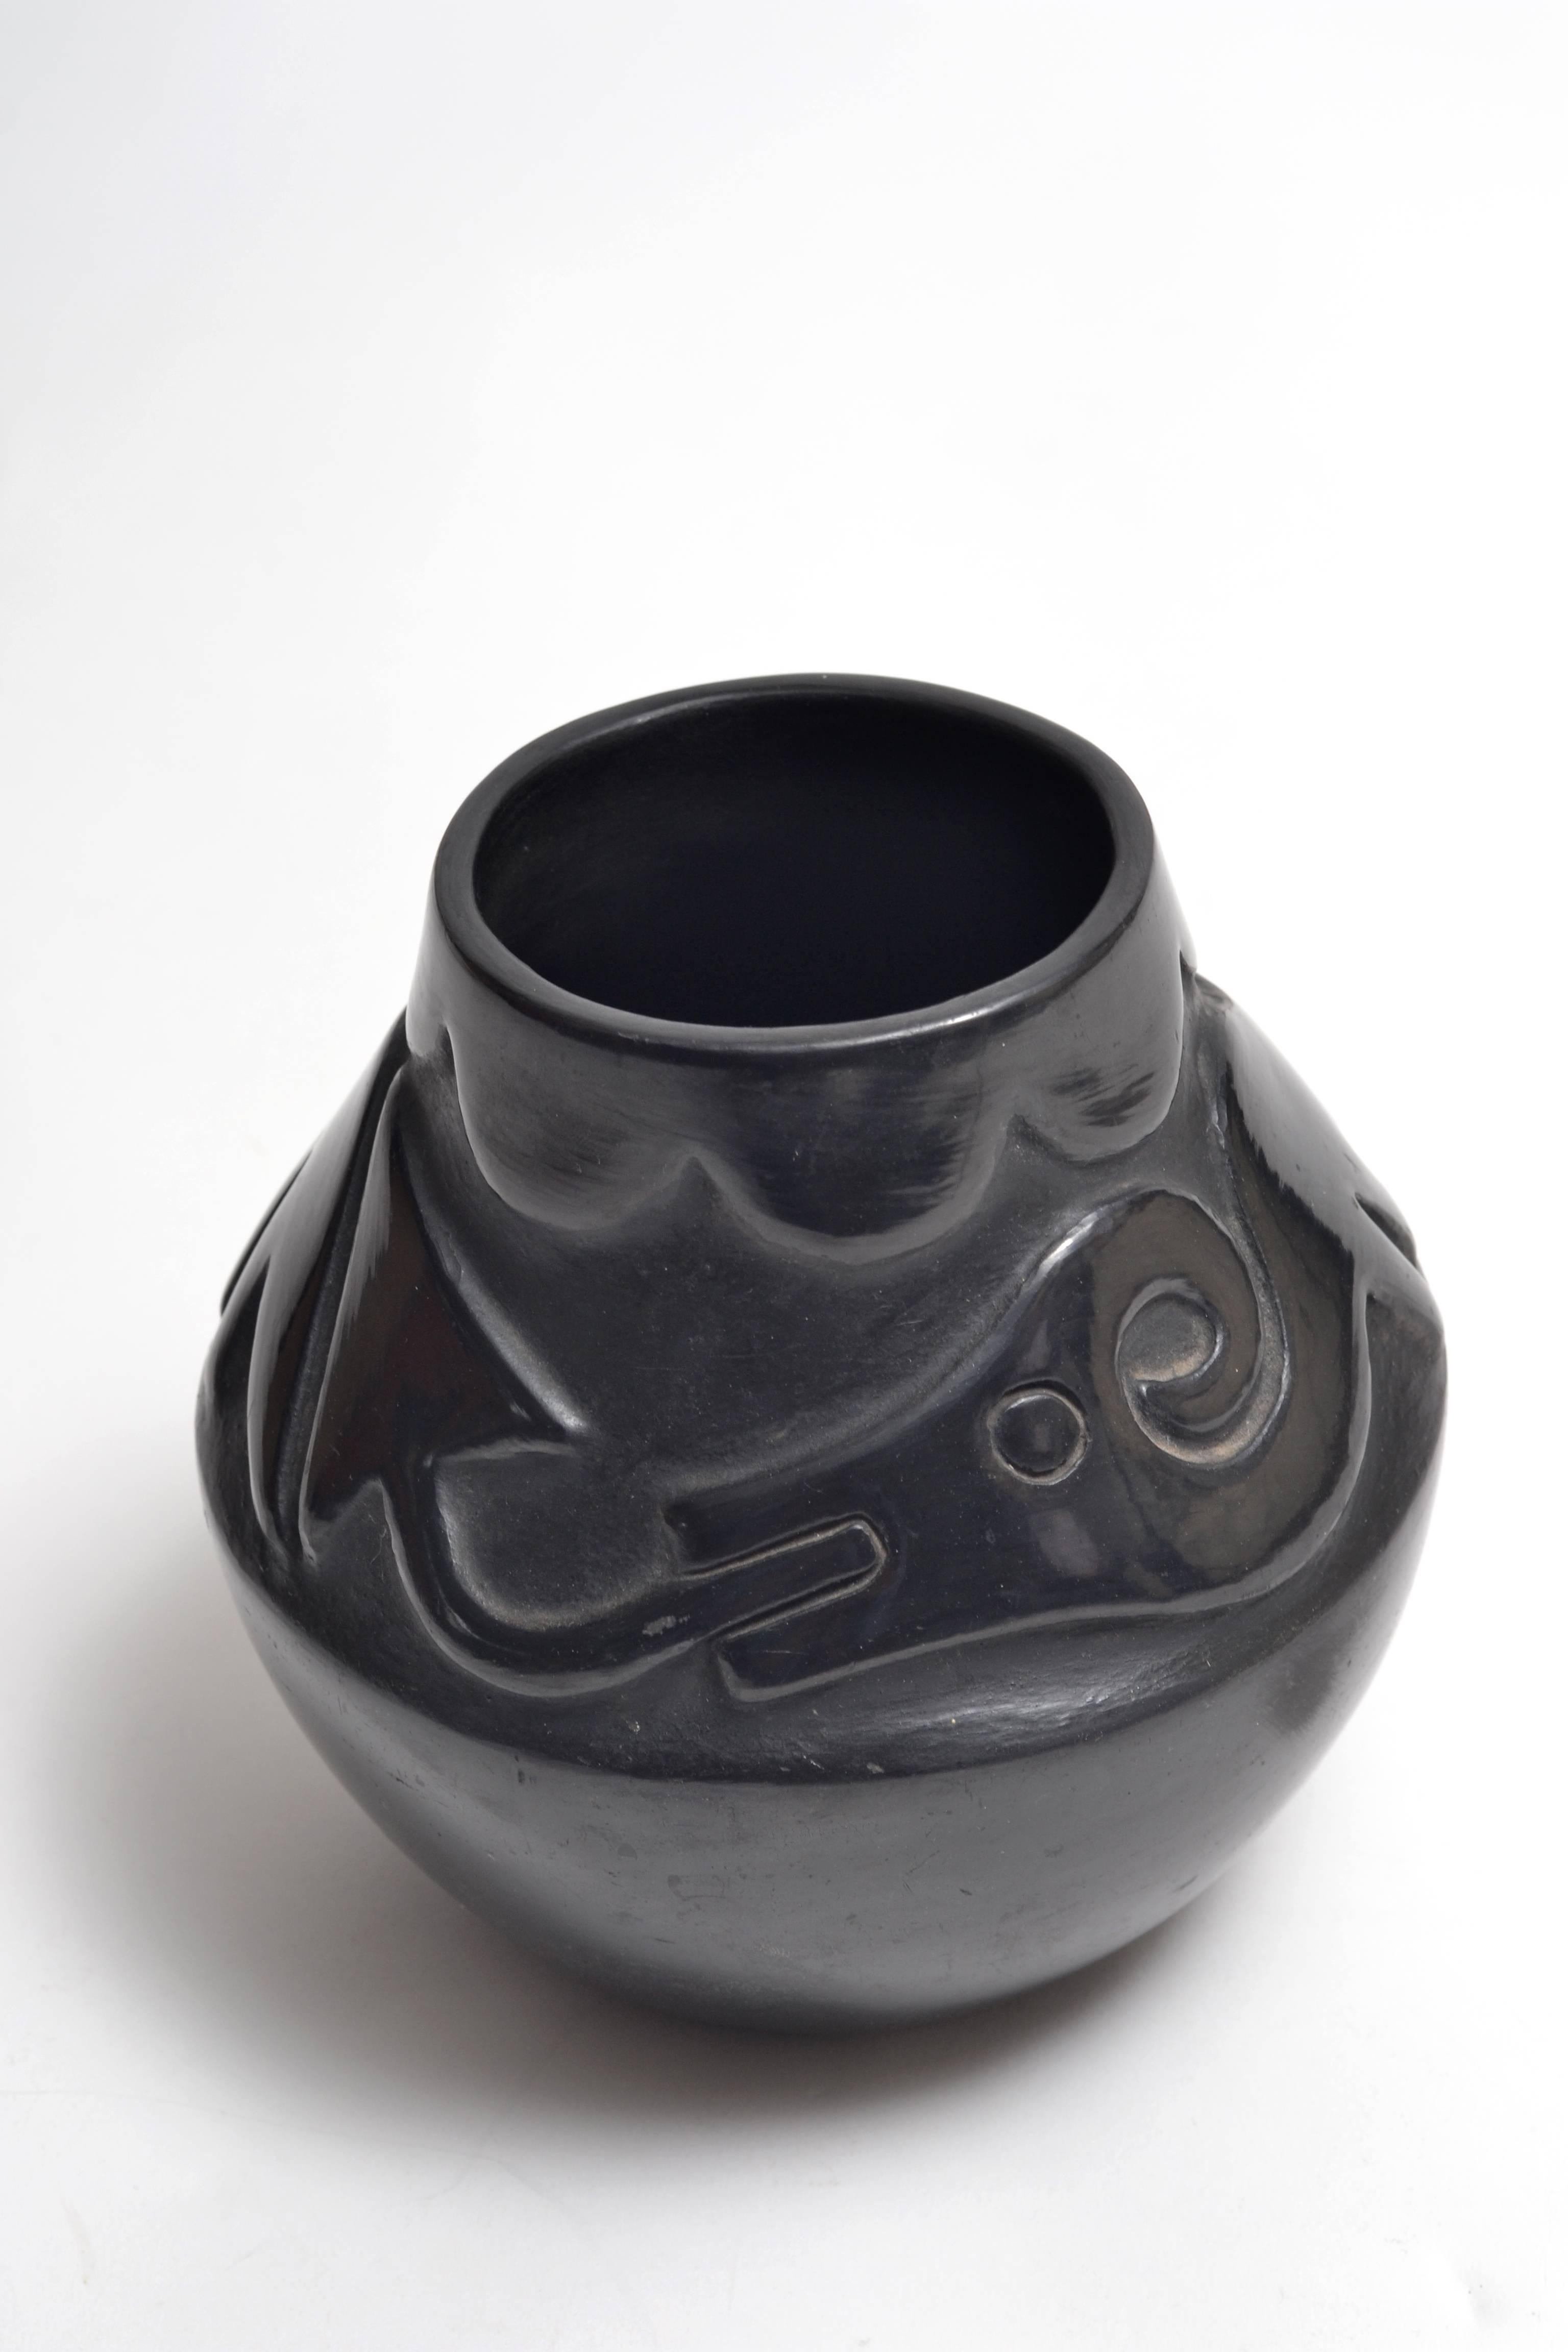 Native American Potter Rose Cata Gonzales (1900-1989) incised, black on black ceramic pot. Rose was credited as an innovator of deep carved pottery around 1930 at San Ildefonso Pueblo, NM. This work features a deeply carved 